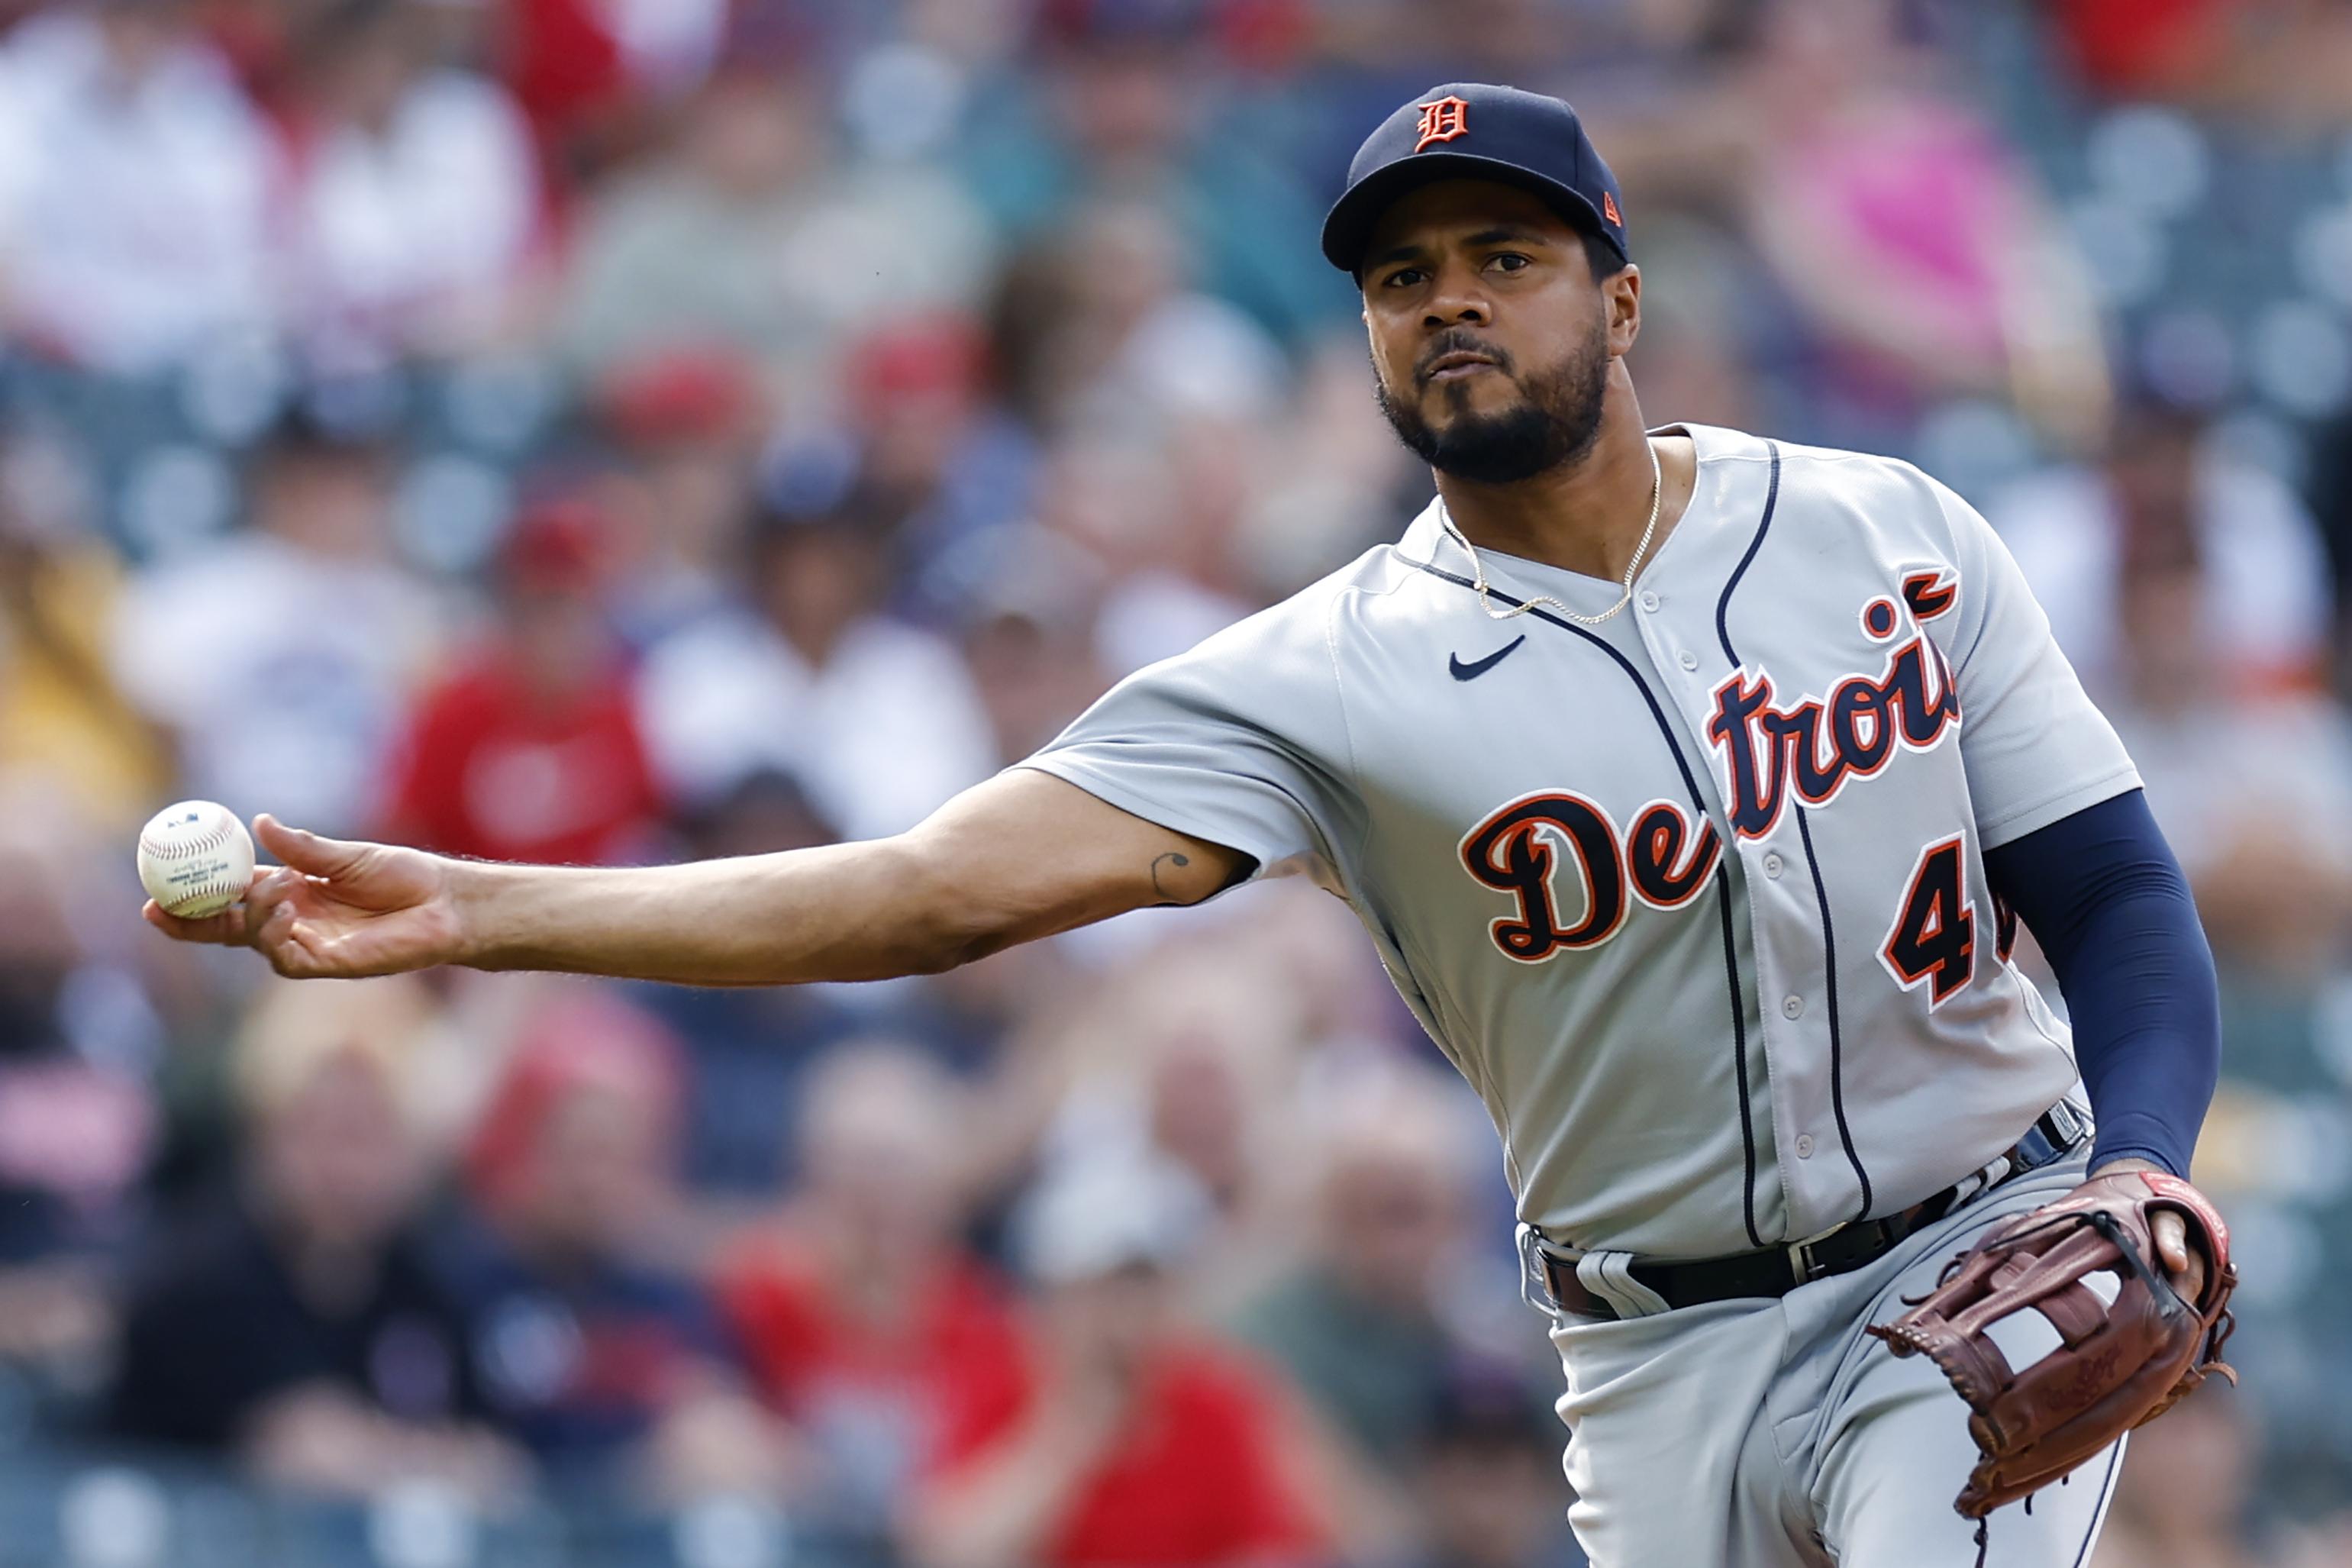 Detroit Tigers' Jeimer Candelario wins 2021 Tiger of the Year